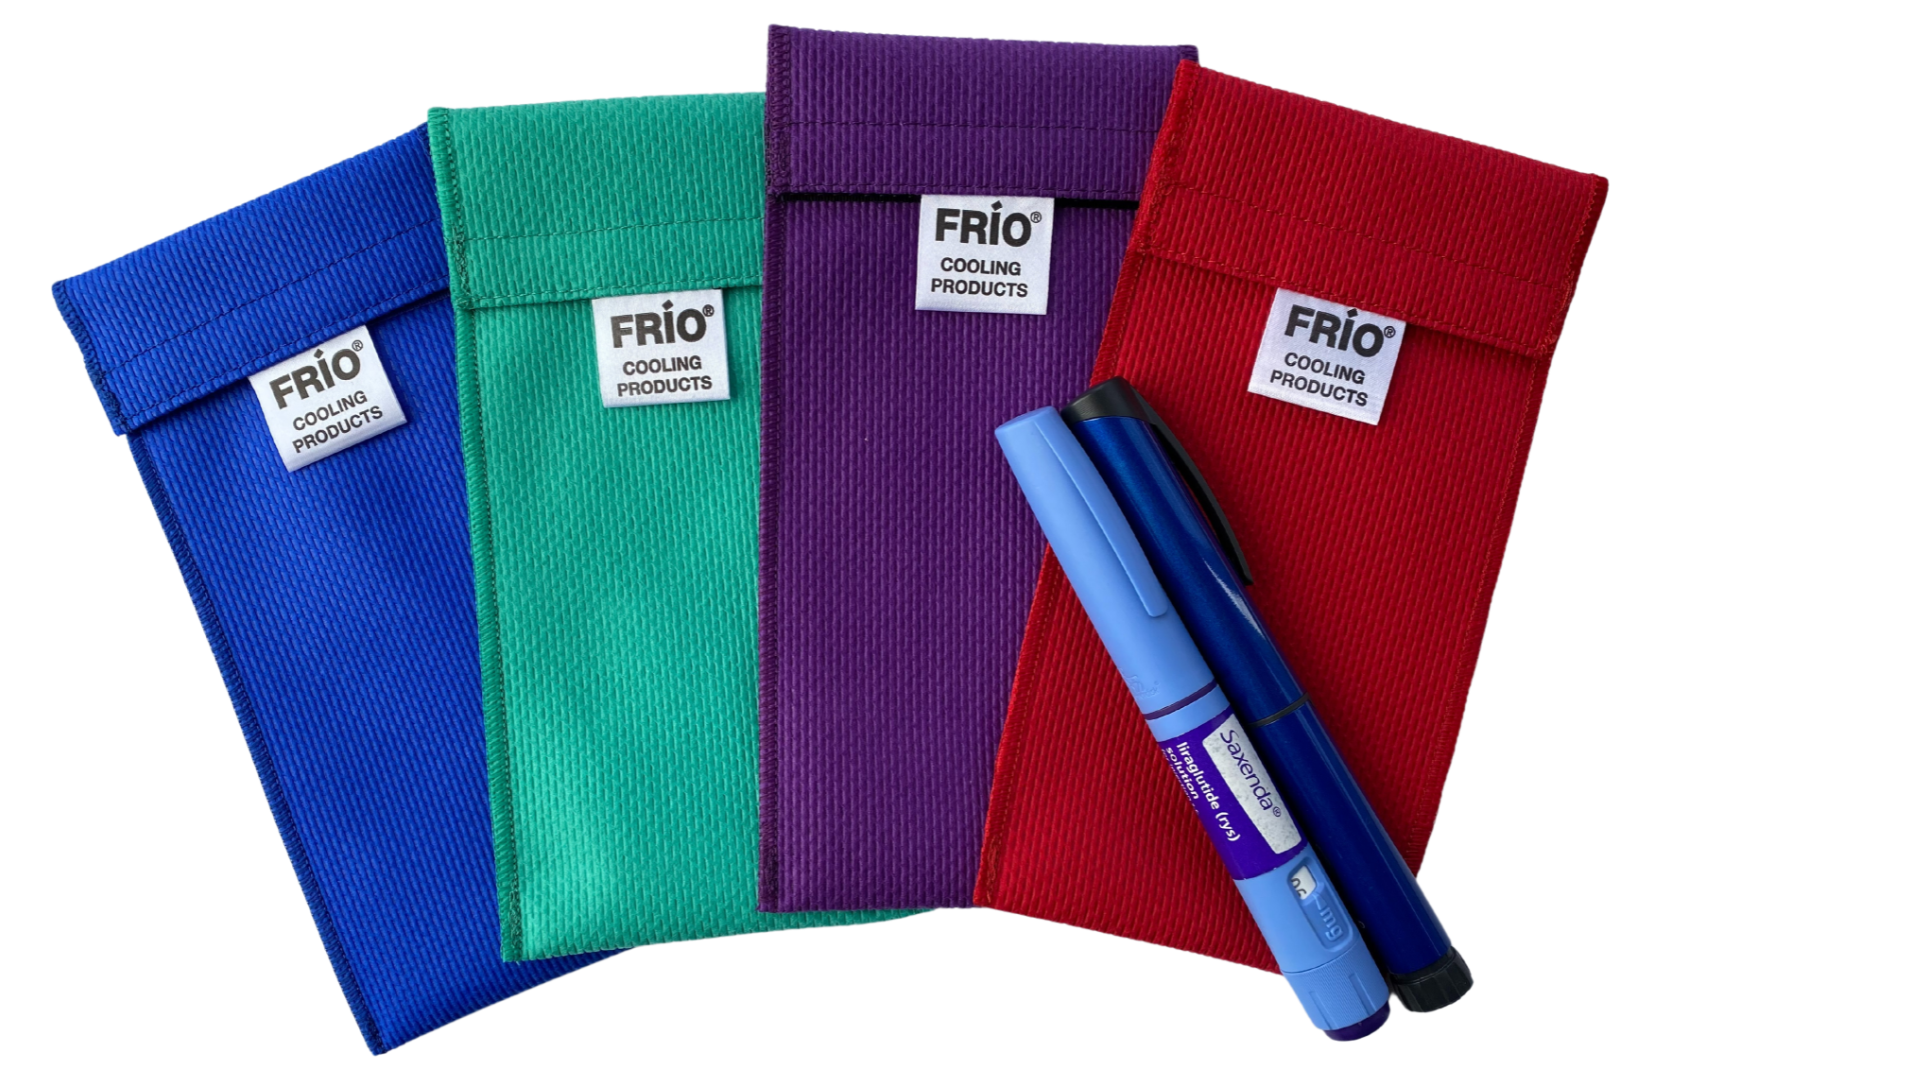 How to Activate the FRIO Insulin Cooling Wallet - Video